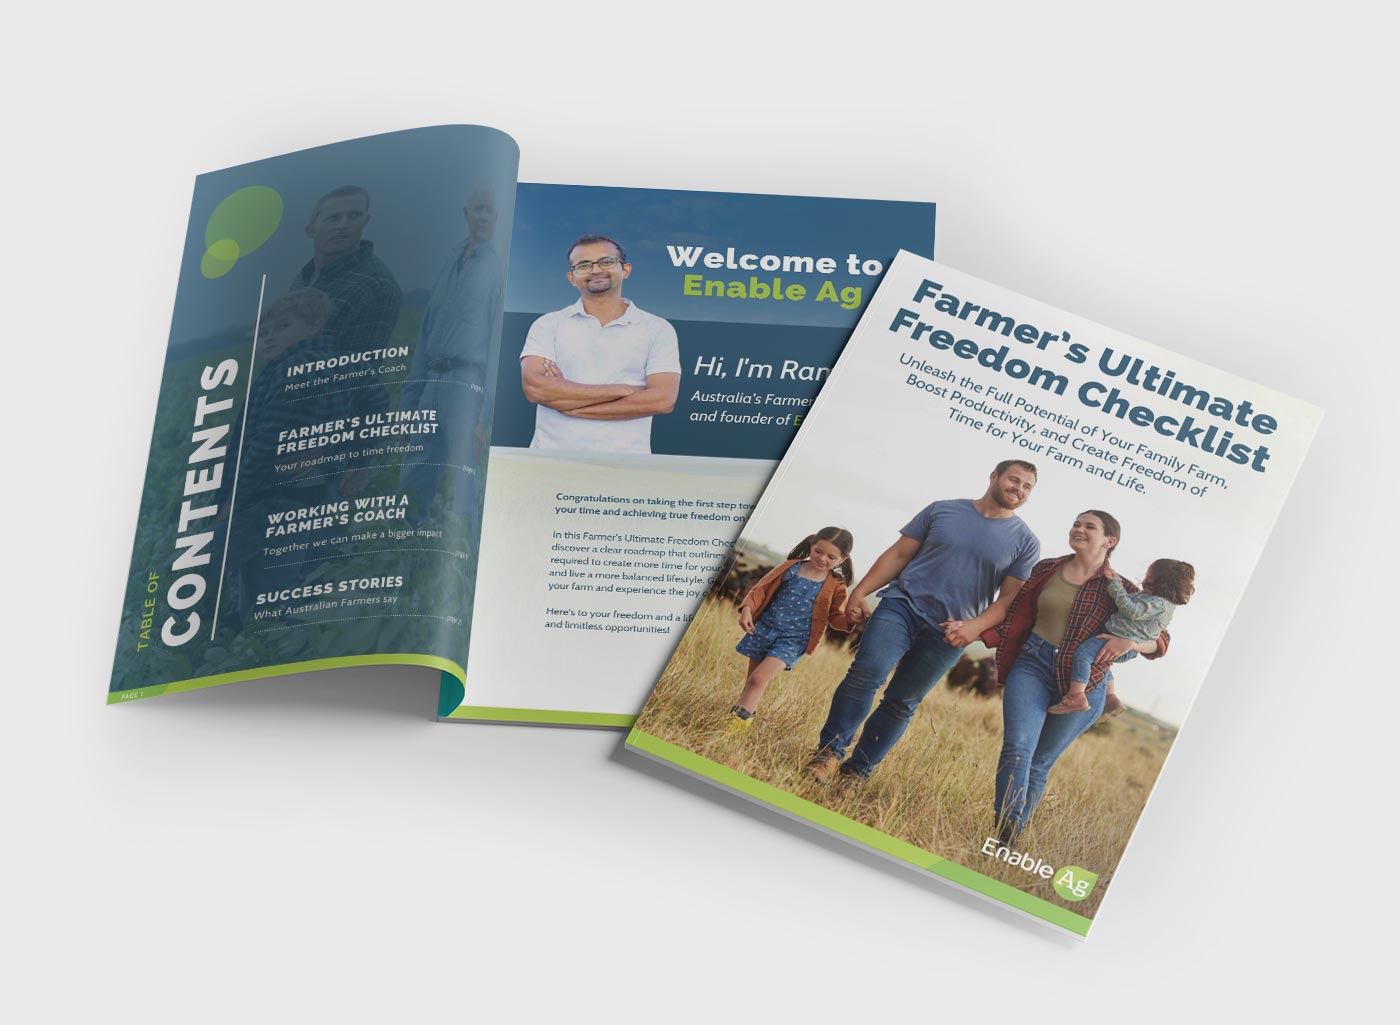 Farmer's Ultimate Freedom Checklist - Free resource for farmers, available for download on the new Enable Ag website.